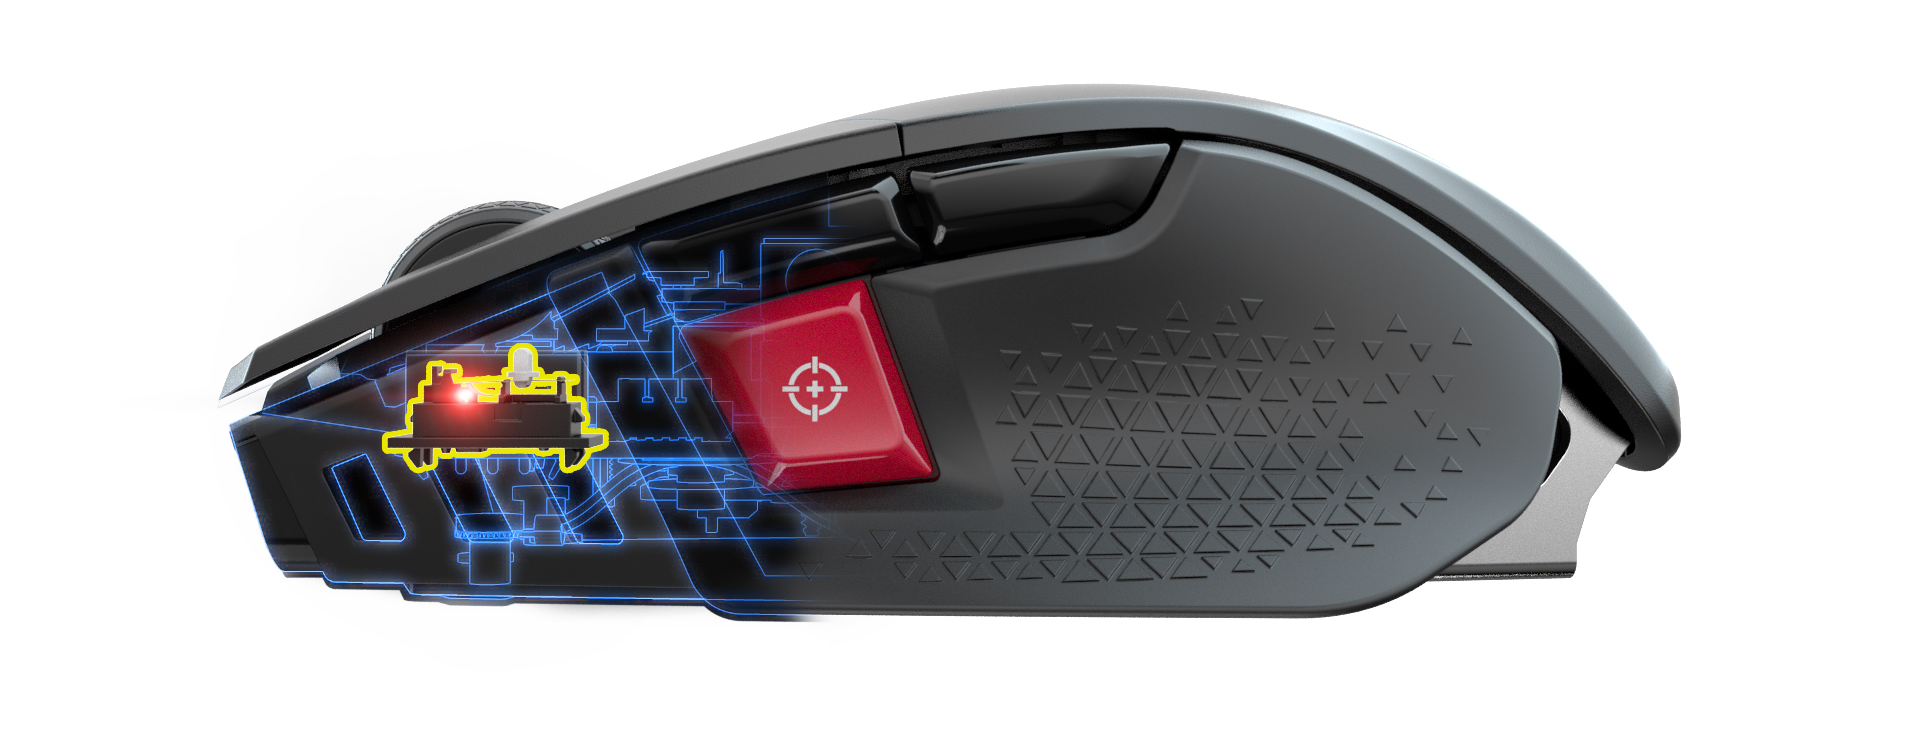 M65 RGB ULTRA WIRELESS Tunable FPS Gaming Mouse — White (AP)